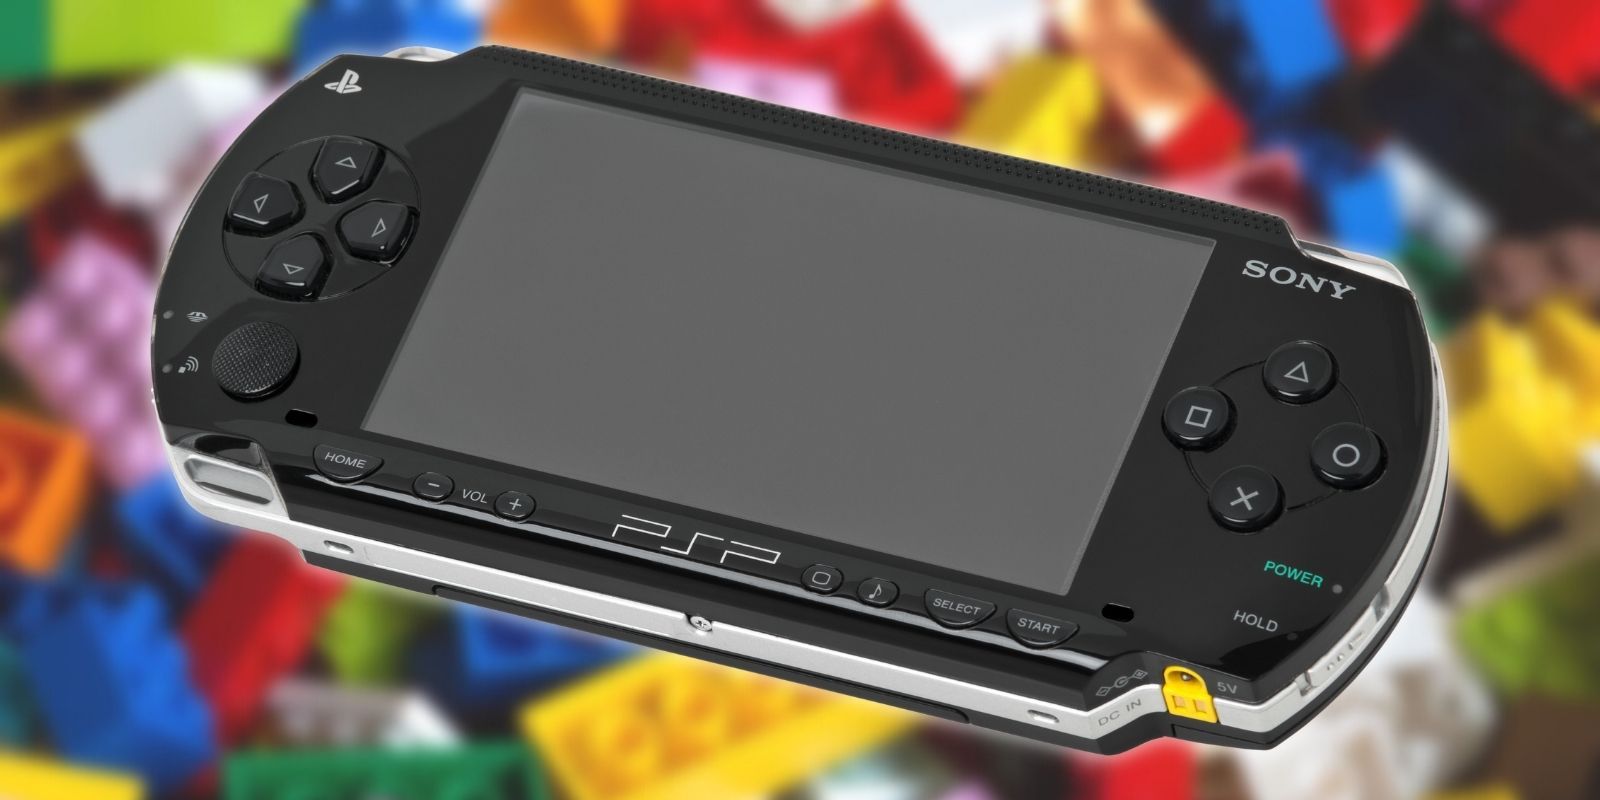 images./playstation-portable/lego